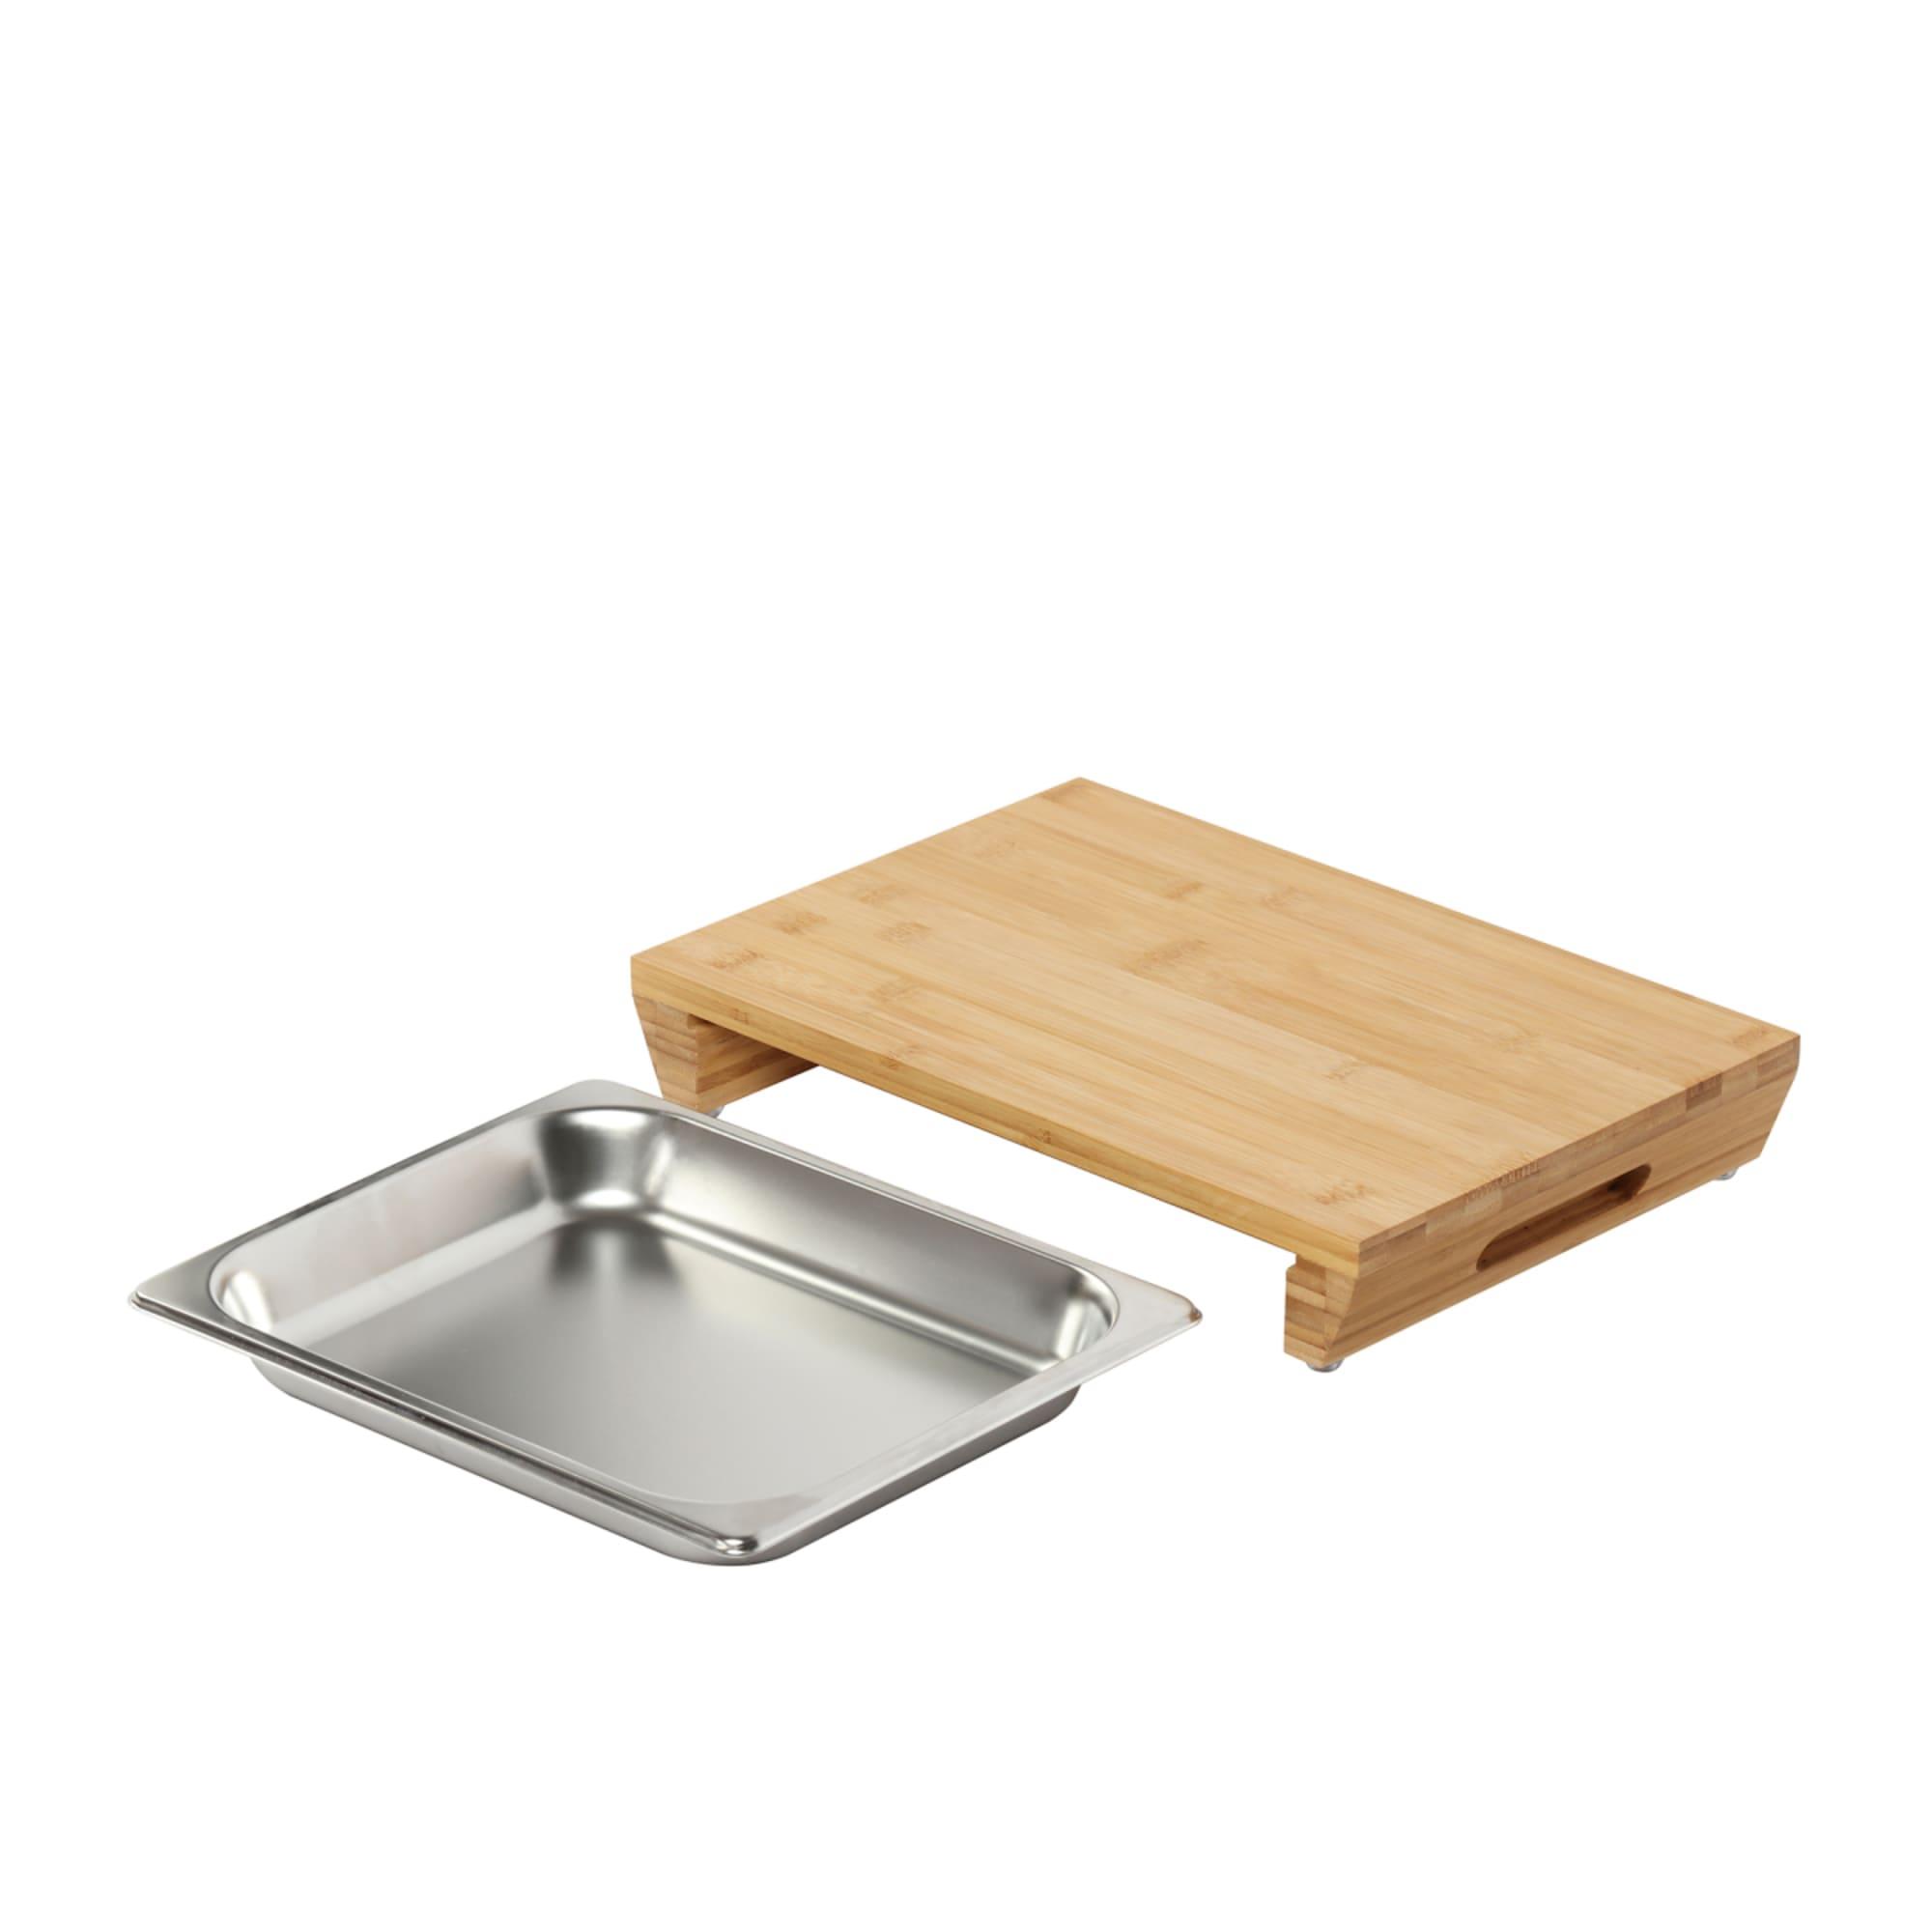 Gourmet Kitchen Bamboo Cutting Board with Stainless Steel Tray 39x27cm Image 3